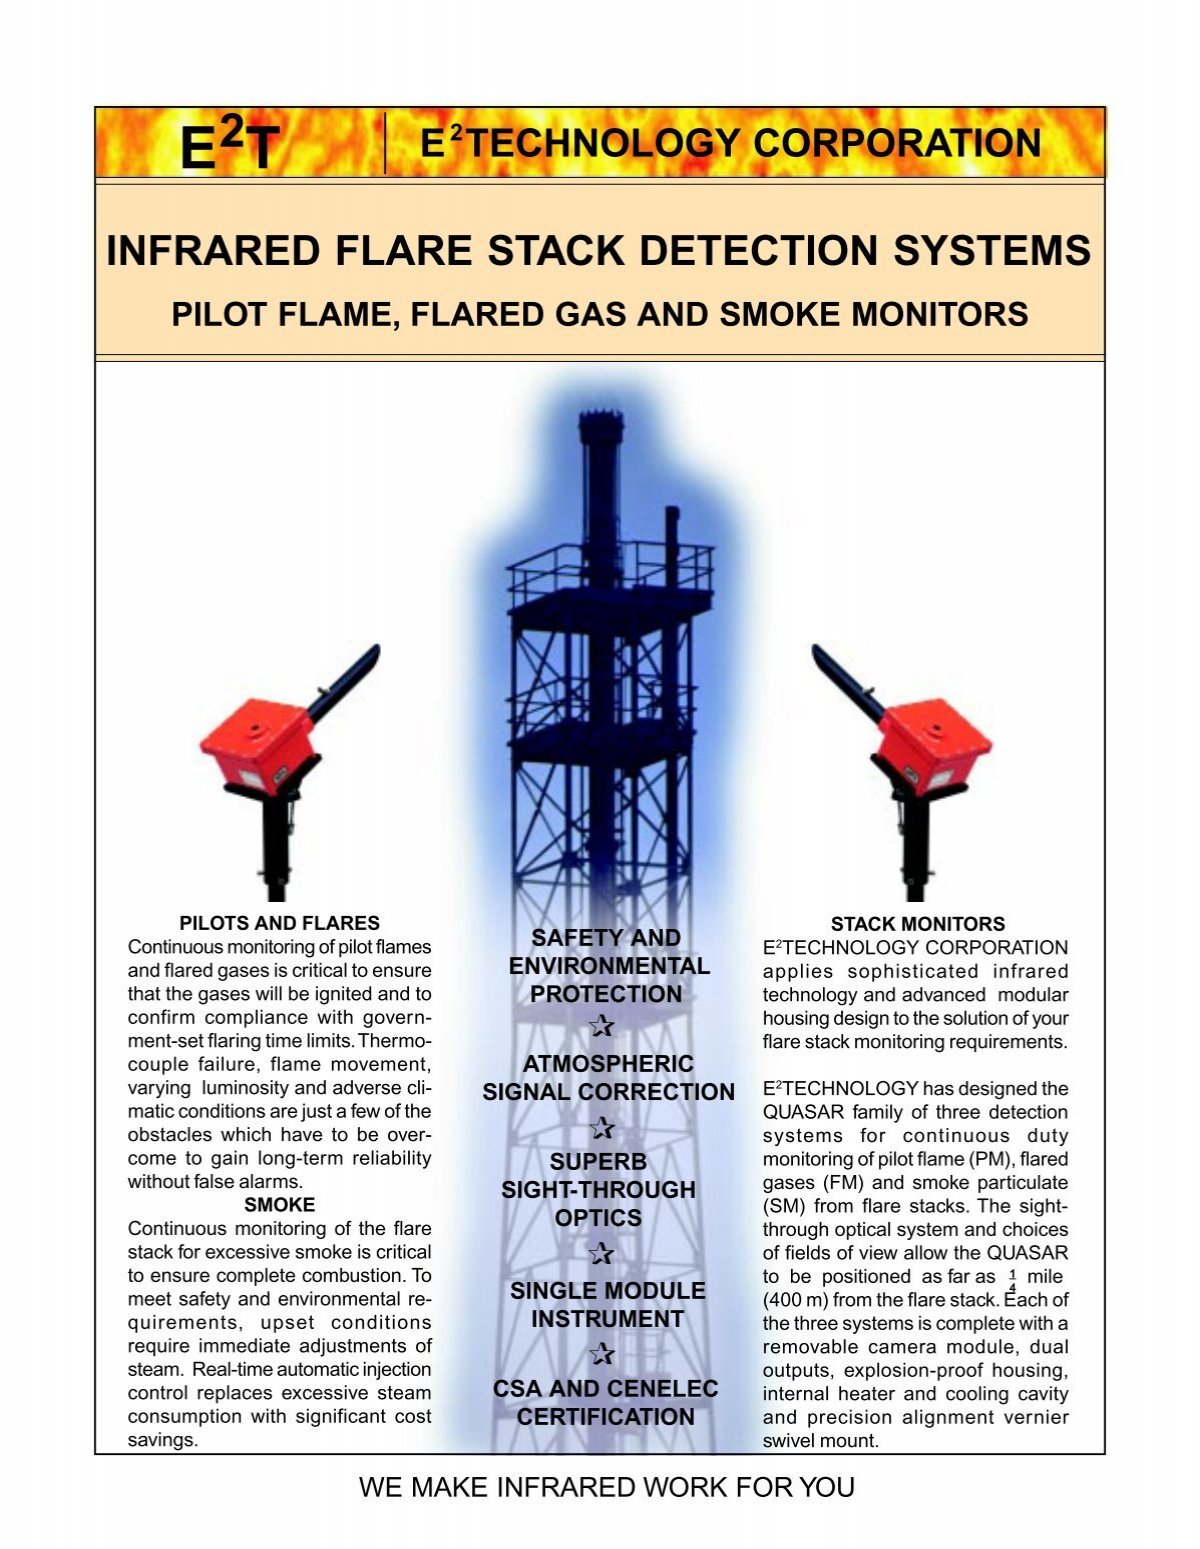 infrared flare stack detection systems pilot flame, flared gas and